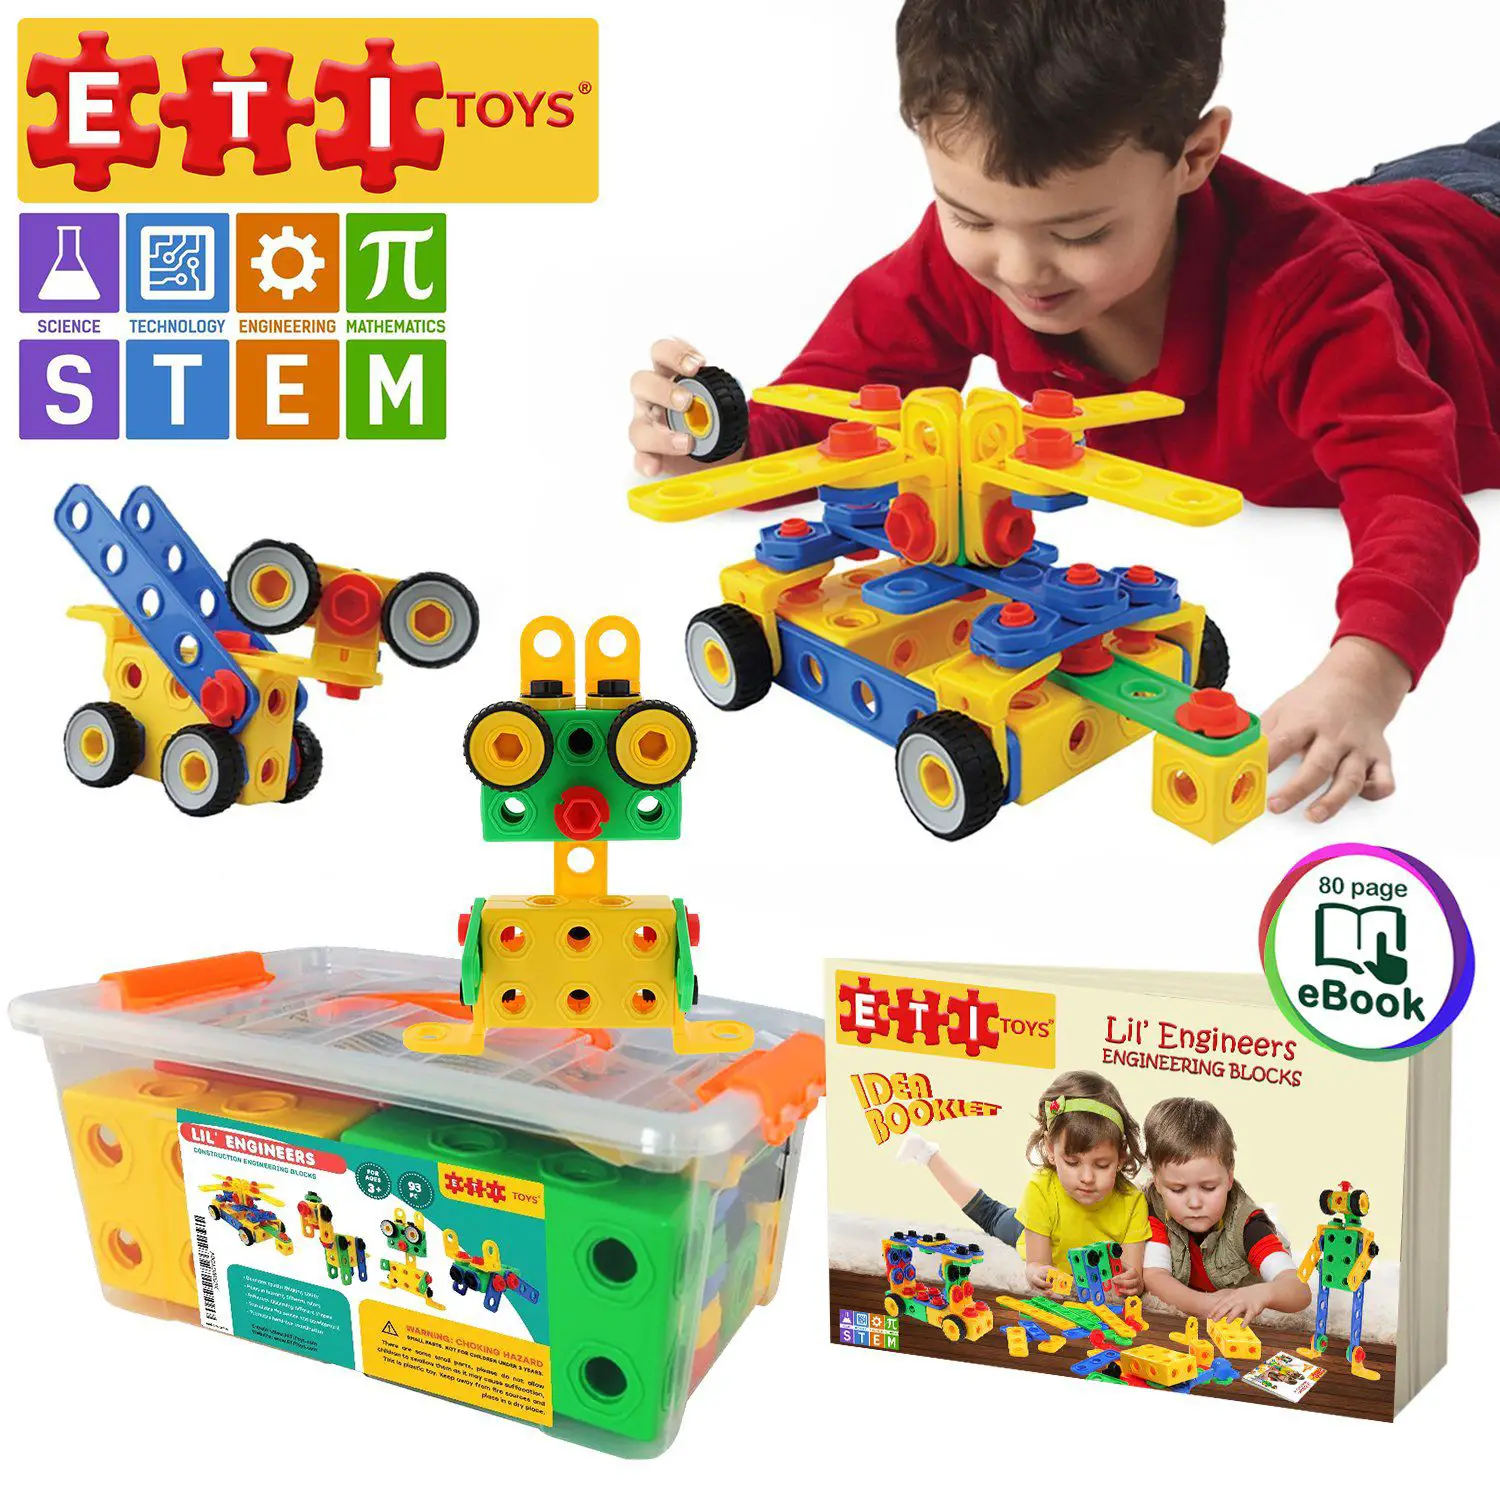 Top Educational Toys for Kids 